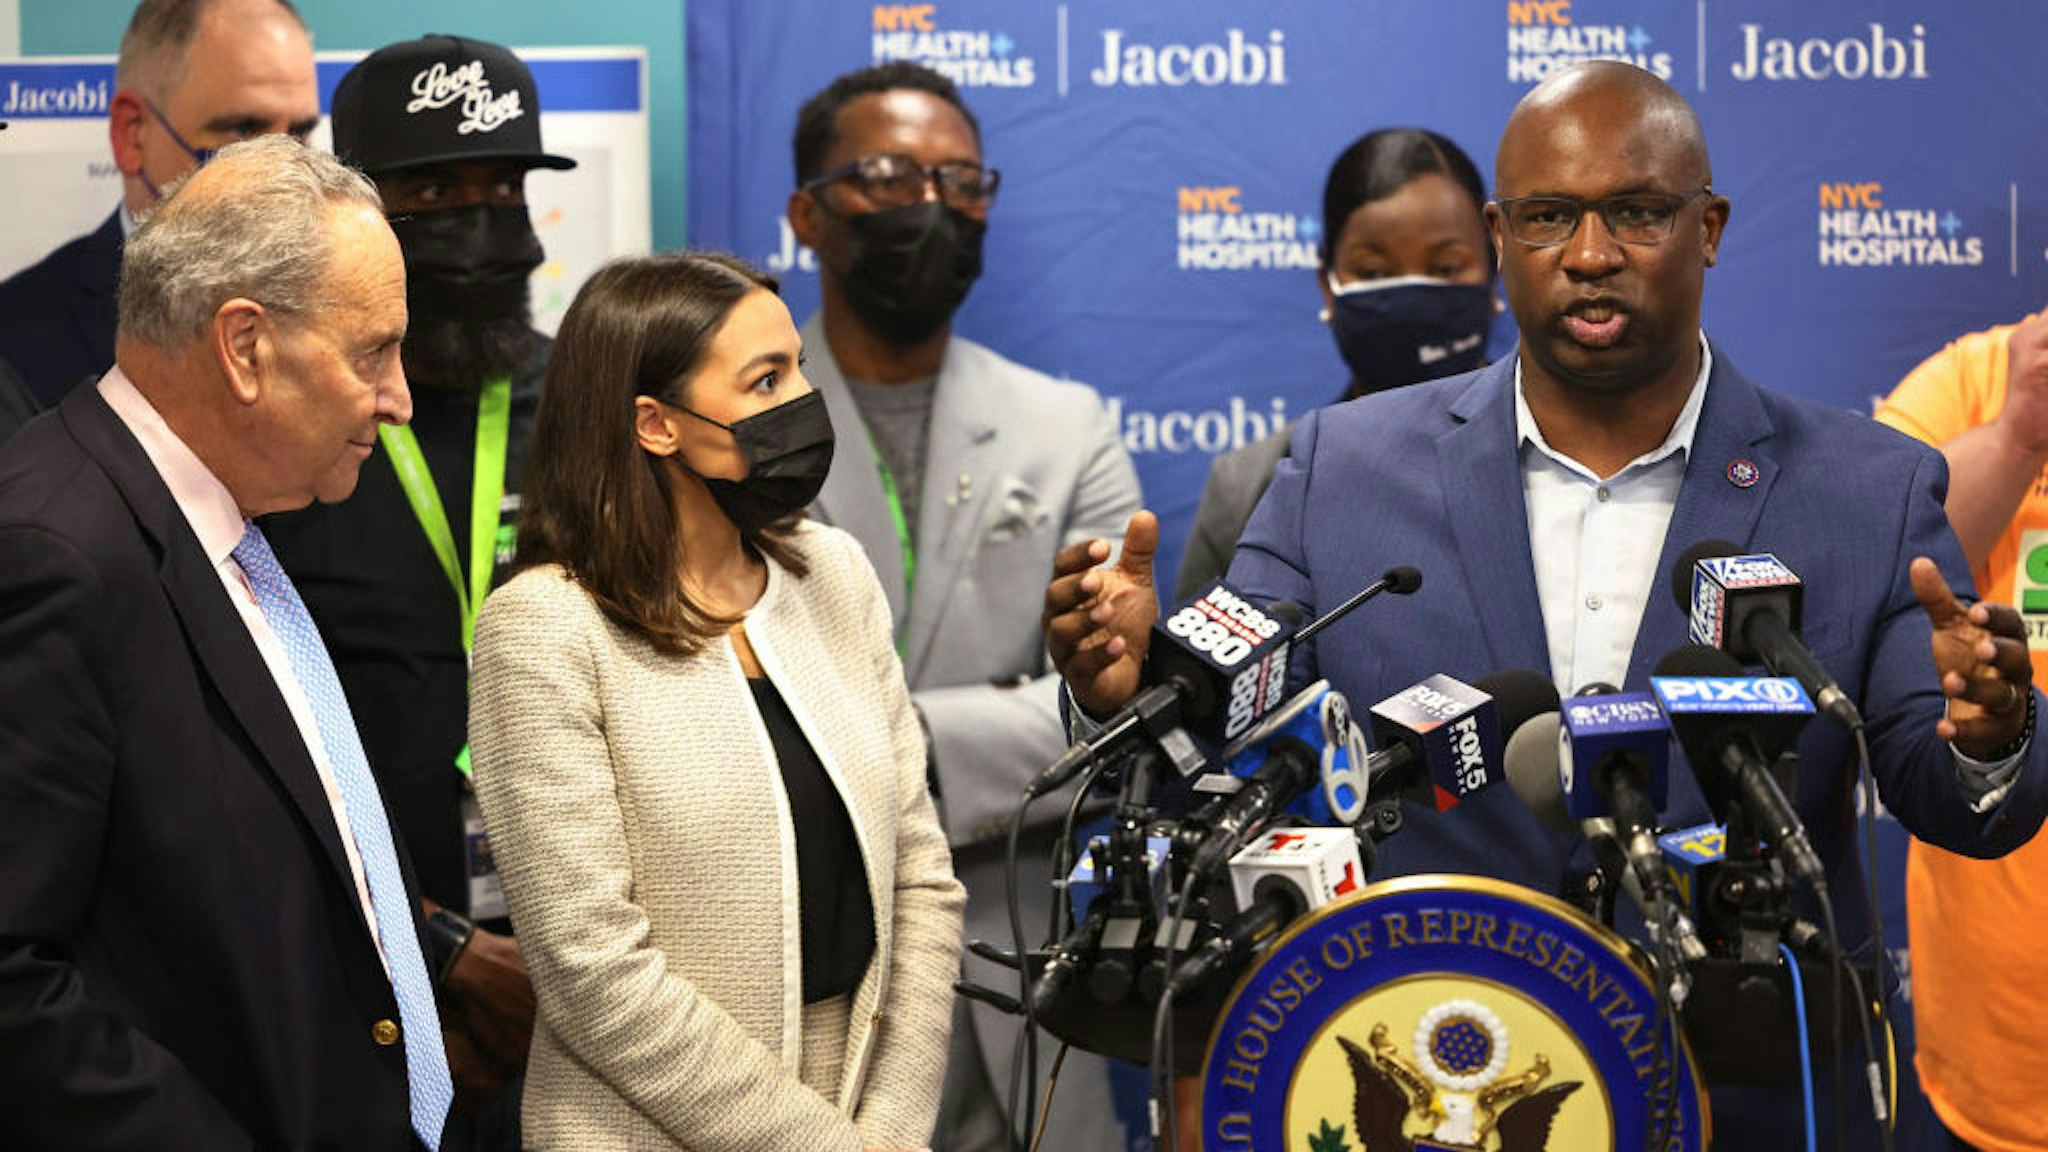 NEW YORK, NEW YORK - JUNE 03: Rep. Jamaal Bowman (D-NY) answers a question during a press conference at Jacobi Hospital in the Morris Park neighborhood on June 03, 2021 in the Bronx borough of New York City. Senate Majority Leader Chuck Schumer (D-NY), joined by Rep. Alexandria Ocasio-Cortez (D-NY) and Rep. Jamaal Bowman (D-NY), held a press conference urging Congress to provide $400,000 to Jacobi Hospital's Stand Up to Violence (SUV) Program, a youth violence reduction program, on the heels of a Memorial Day weekend that saw a total of nine shootings across NYC. One of the victims was a 15-year old Bronx resident. The program is modeled after Chicago's Cure Violence program that responds to shootings to help prevent retaliation and to assists family members of those who have been injured or killed. The money would allow Stand Up to Violence (SUV) Program to add an emergency room social worker, case worker, part time psychiatrist and a creative arts or music therapist.